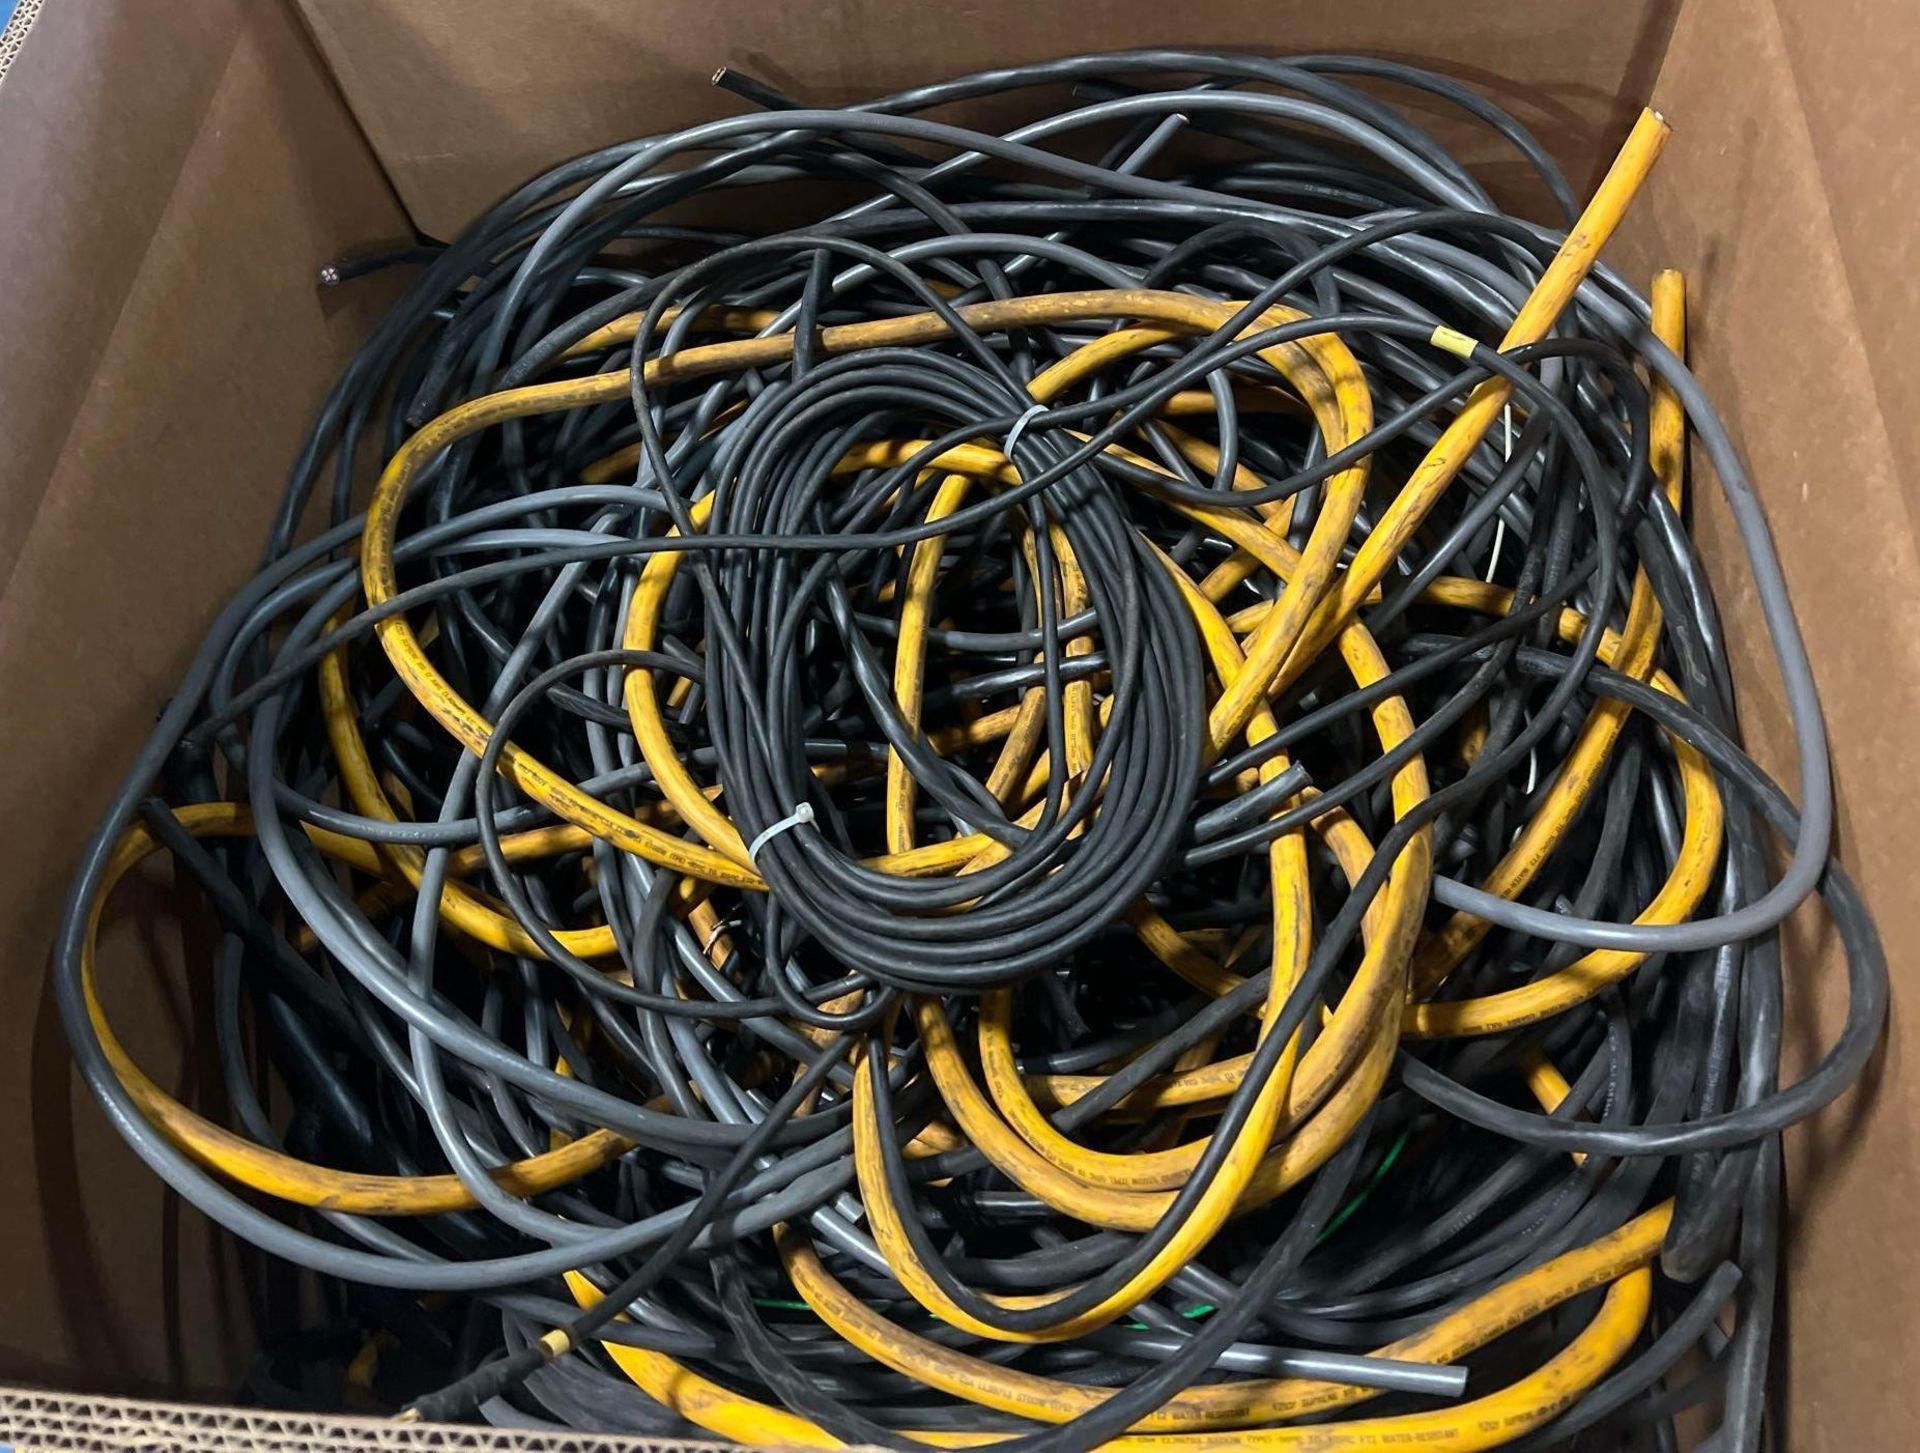 Scrap Wire (Insulated) 253 Lbs. (Includes Tare Weight)